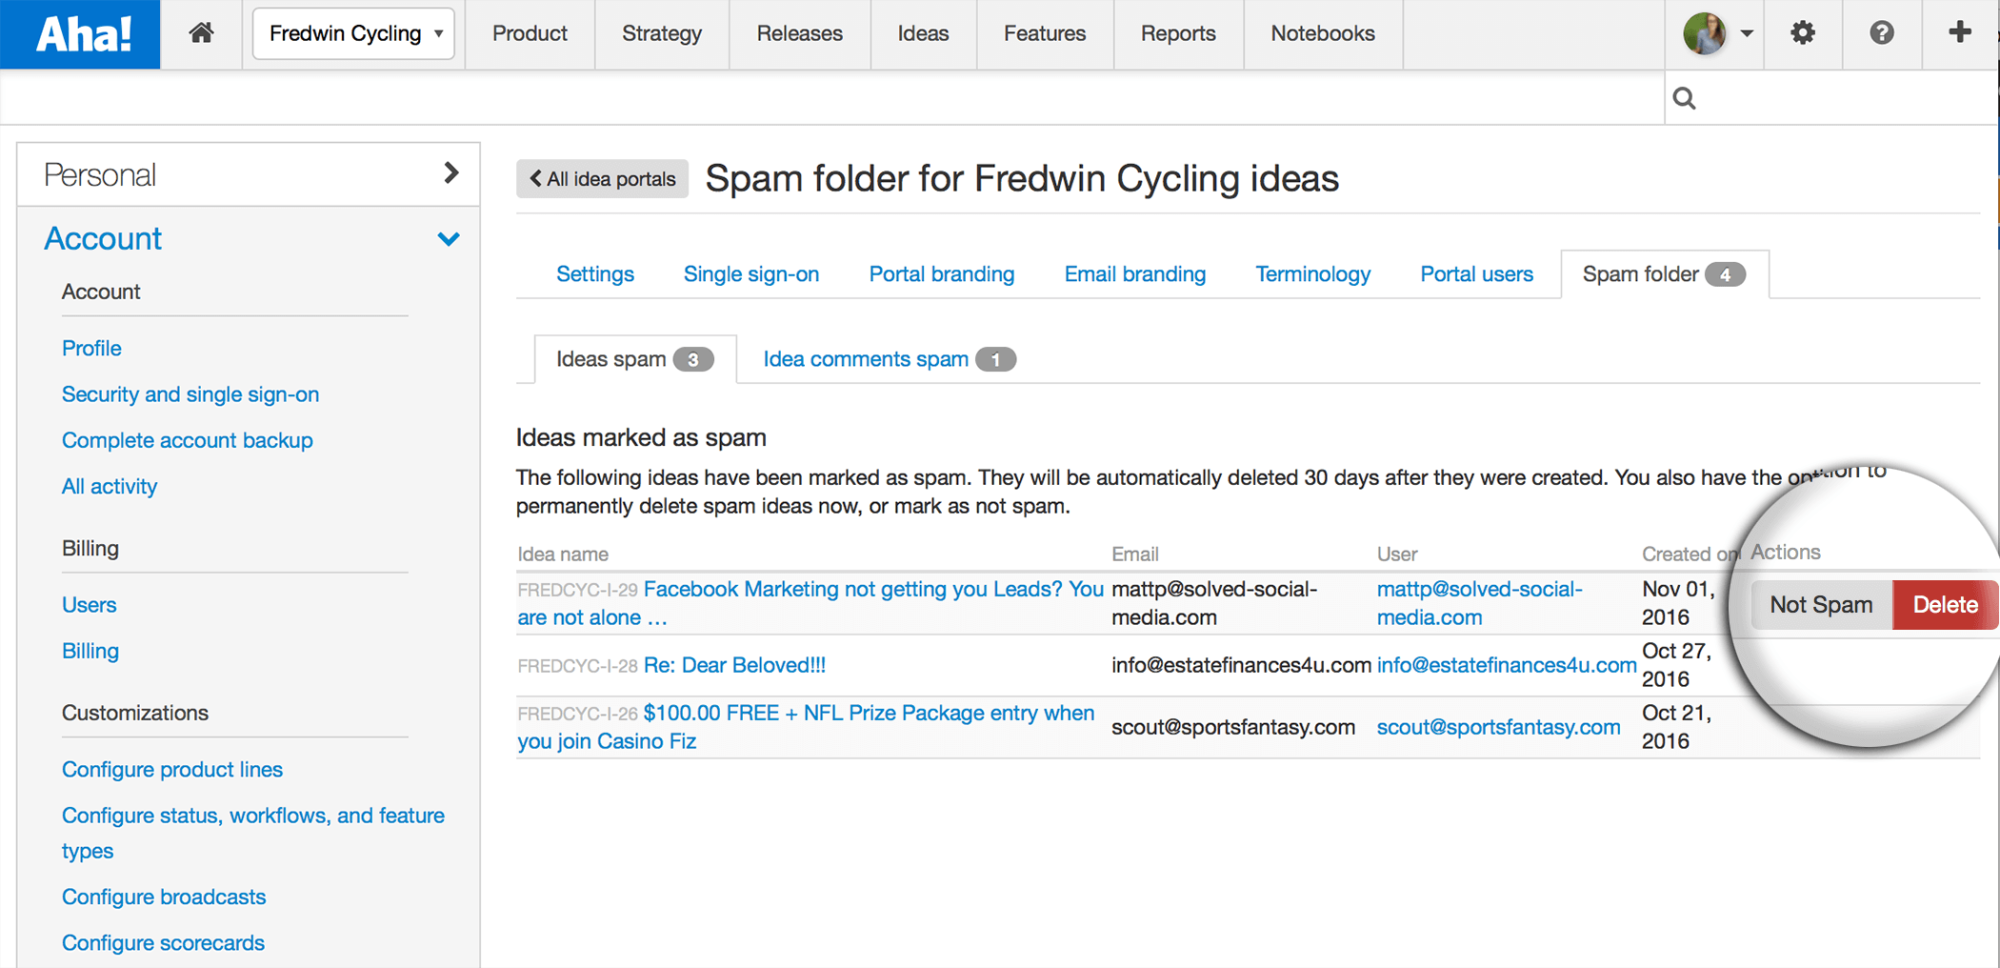 Blog - Just Launched! — Capture Customer Ideas and Eliminate Spam - inline image